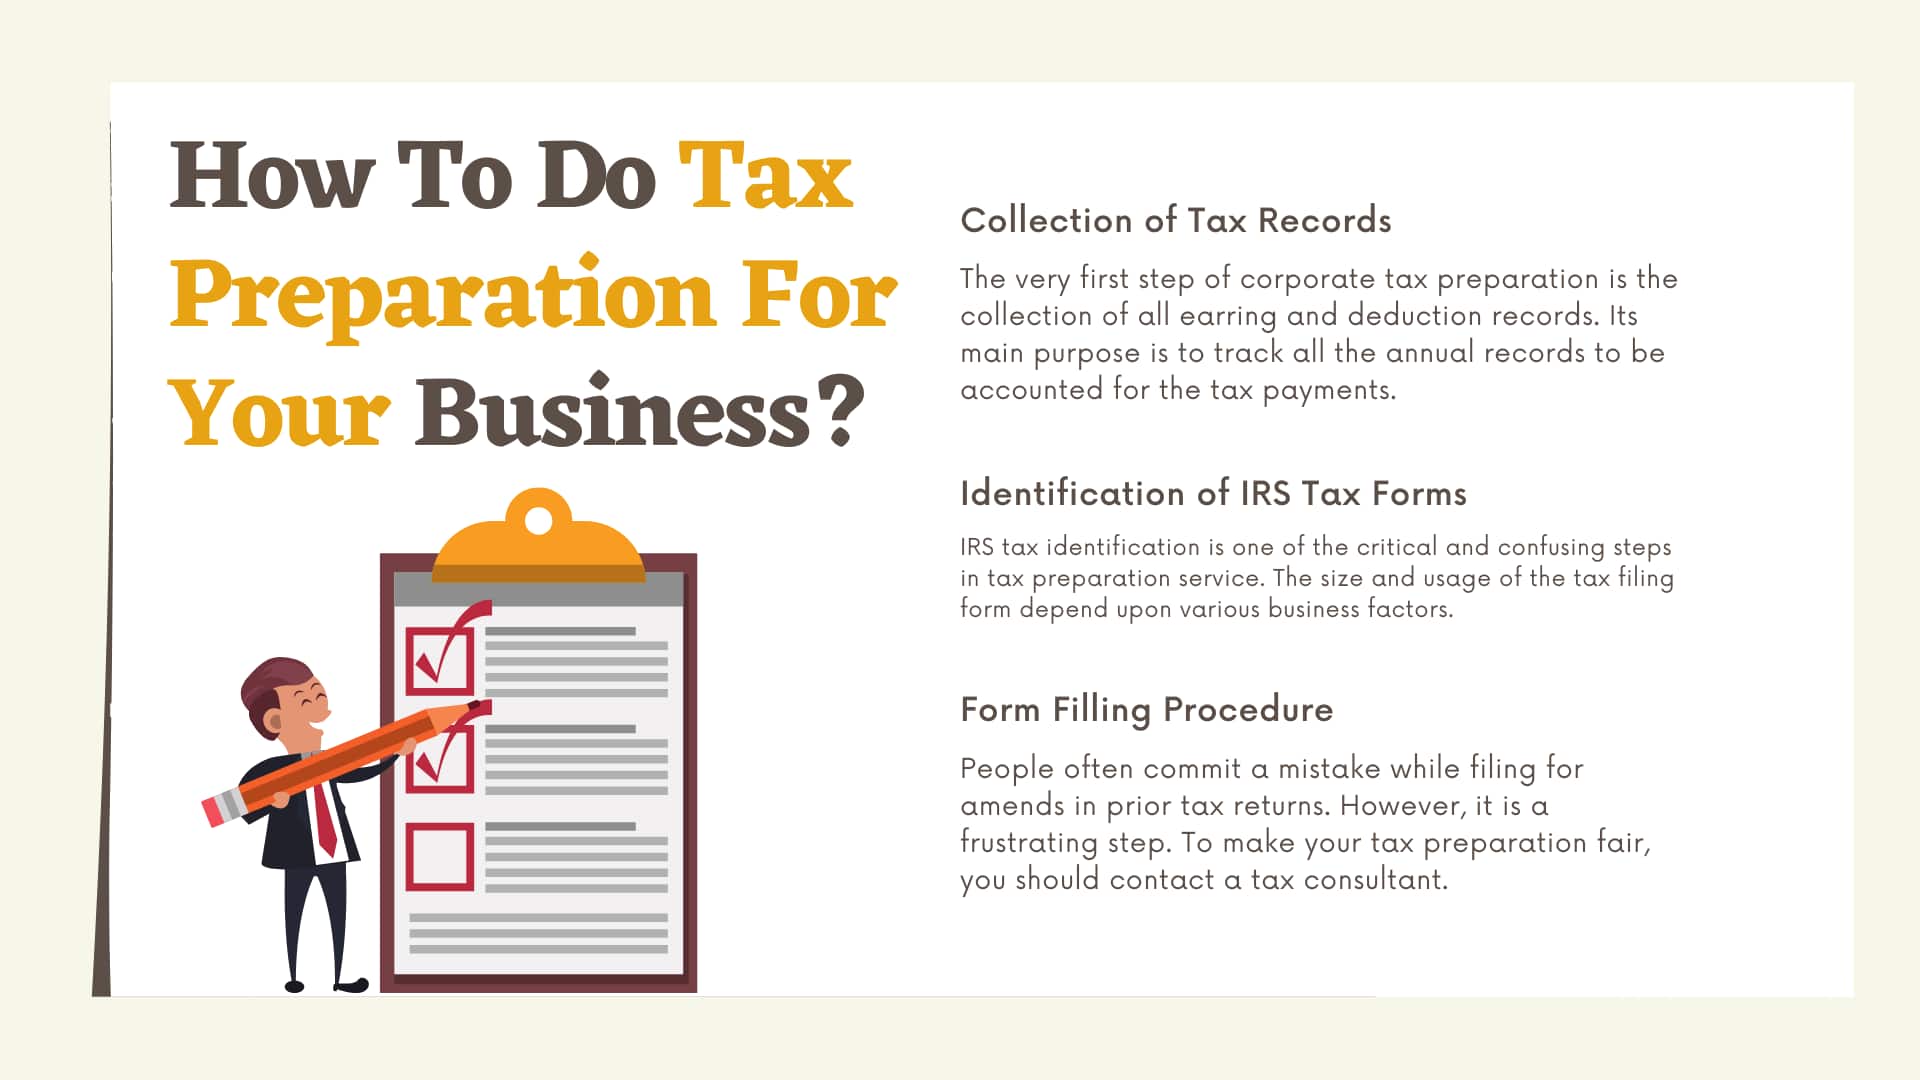 How To Do Tax Preparation For Your Business